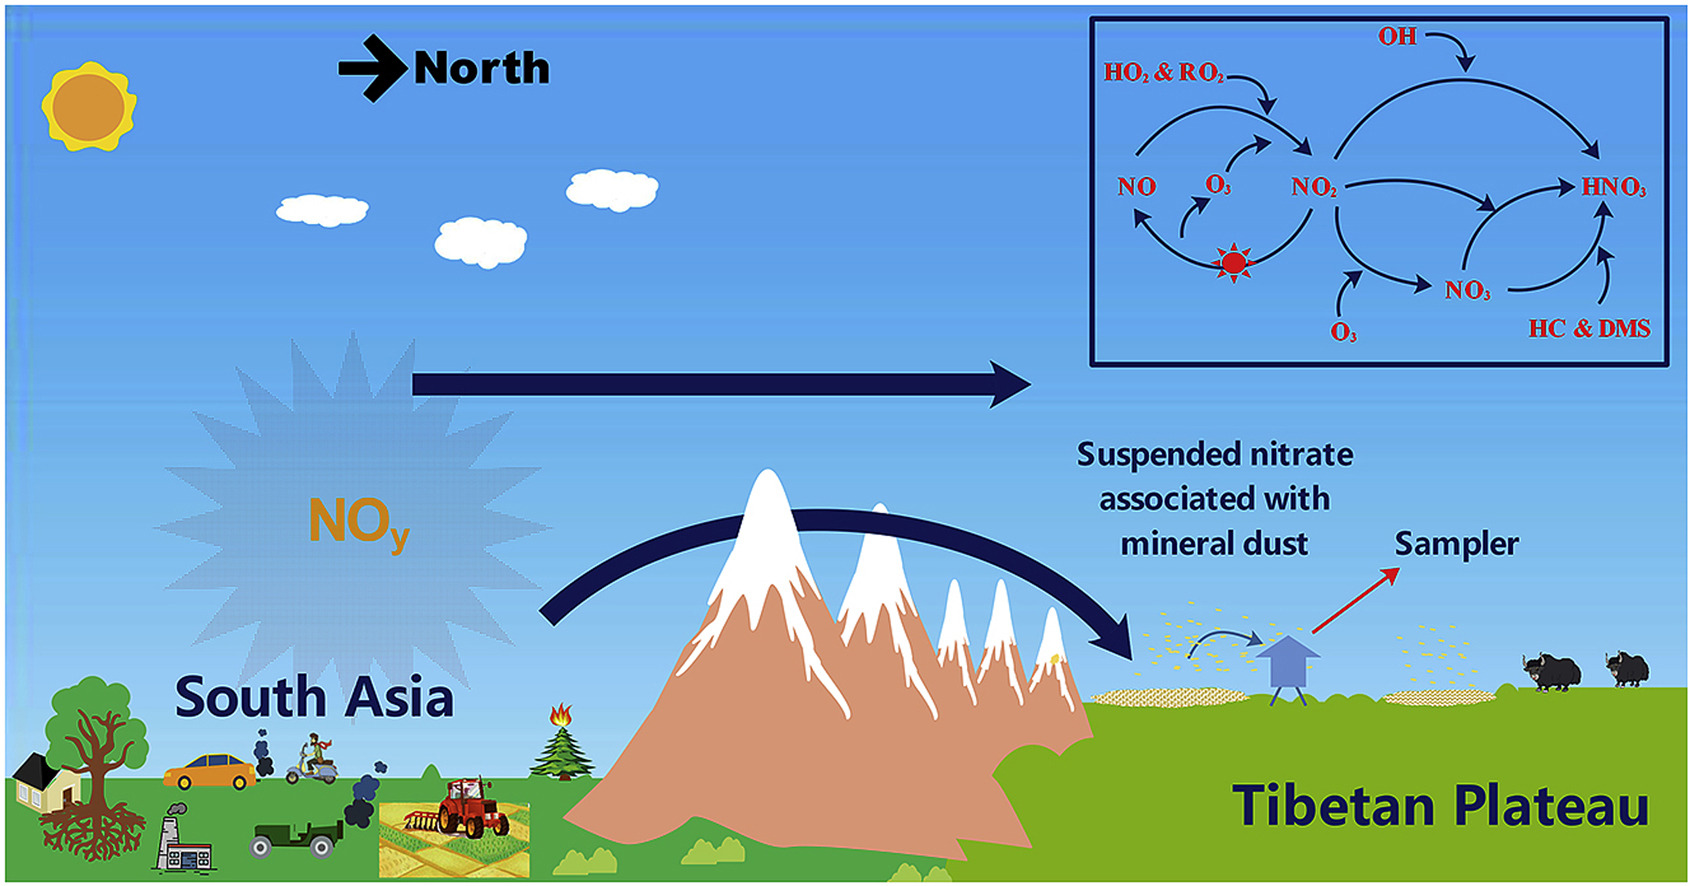 Schematic illustration of South Asia sourced nitrate aerosols transported to the Tibetan Plateau as well as its formation mechanisms in the troposphere